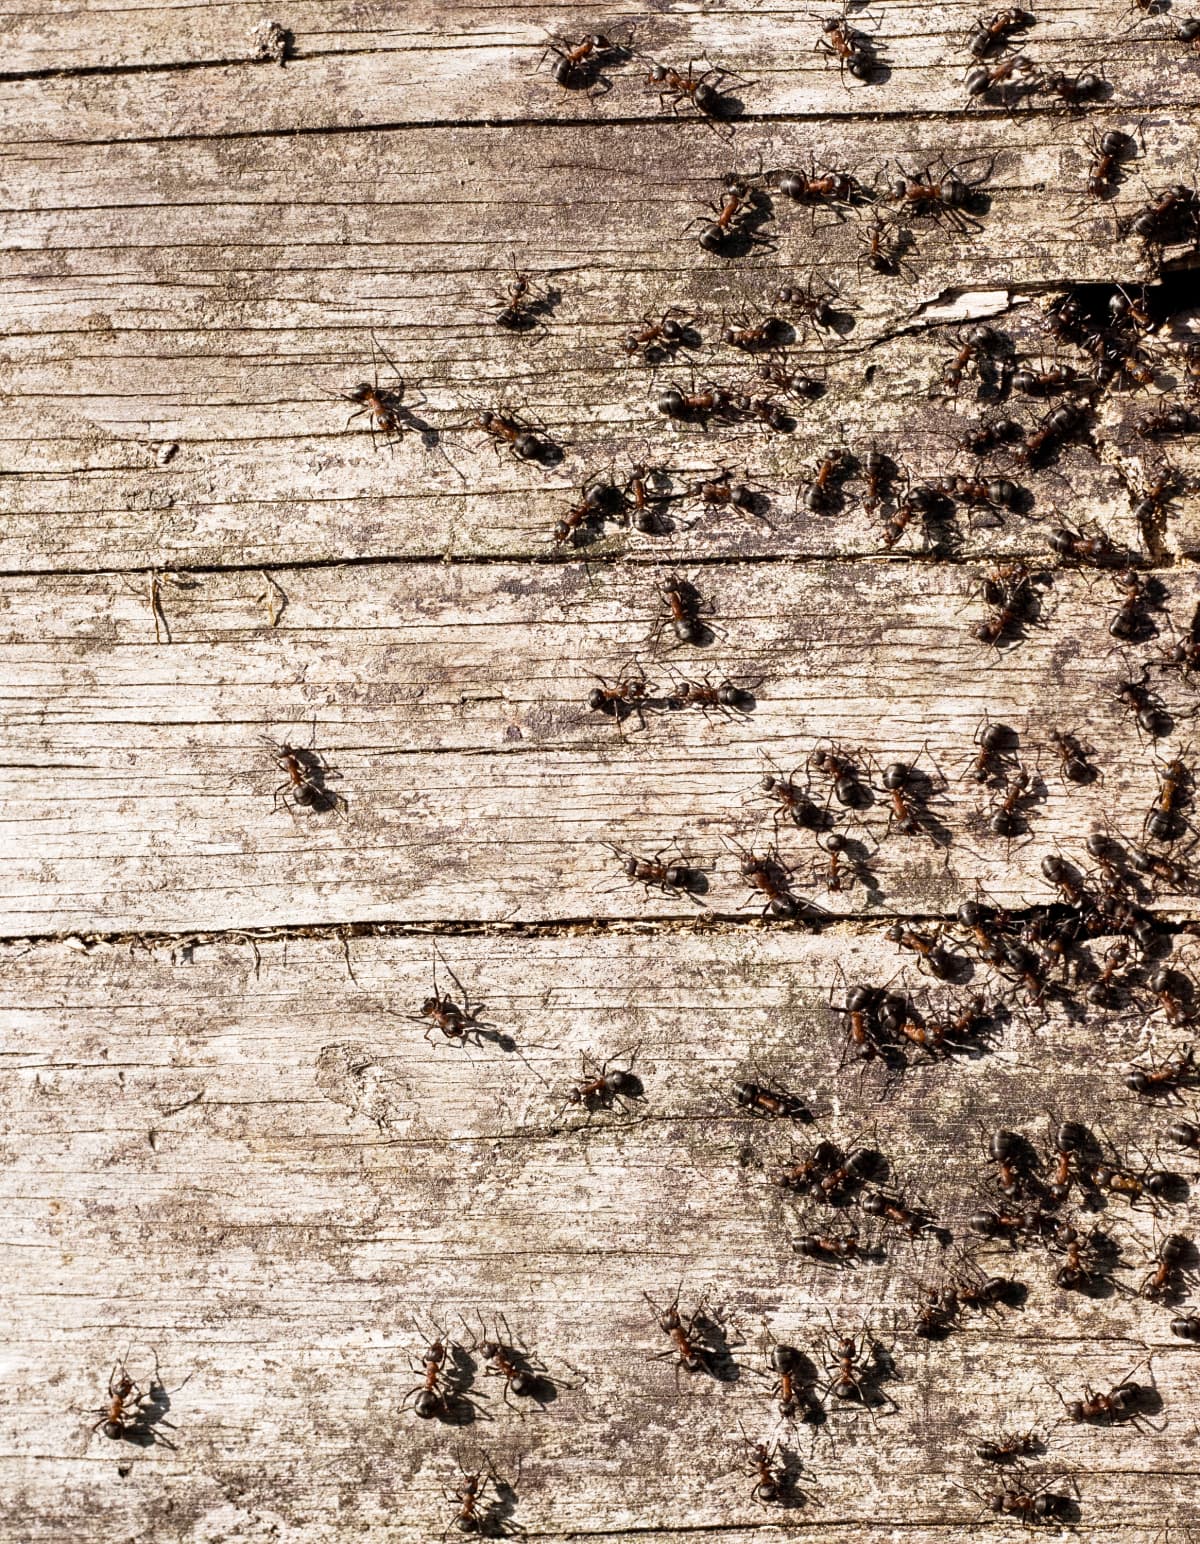 Ants in a forest on old timber